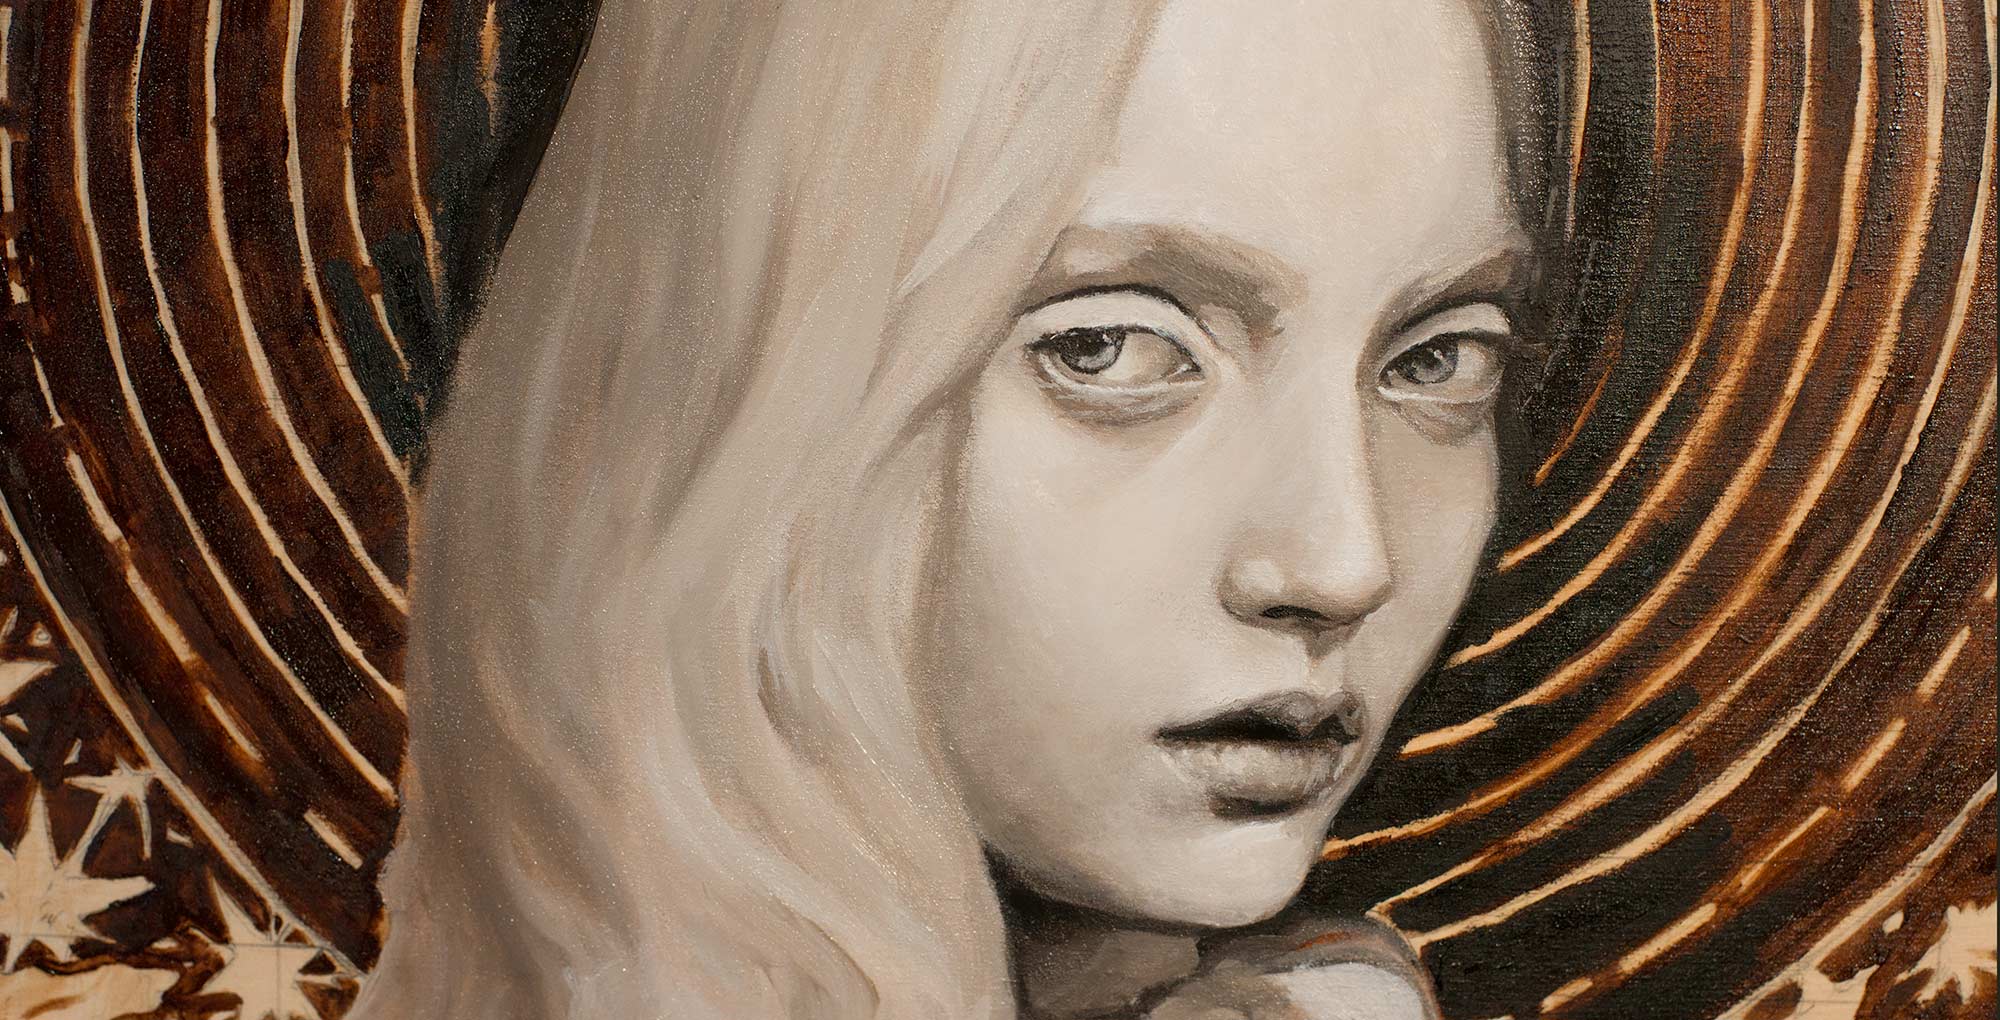 Codie Young Oil Painting Deadlayer Details of face by artist Danny roberts